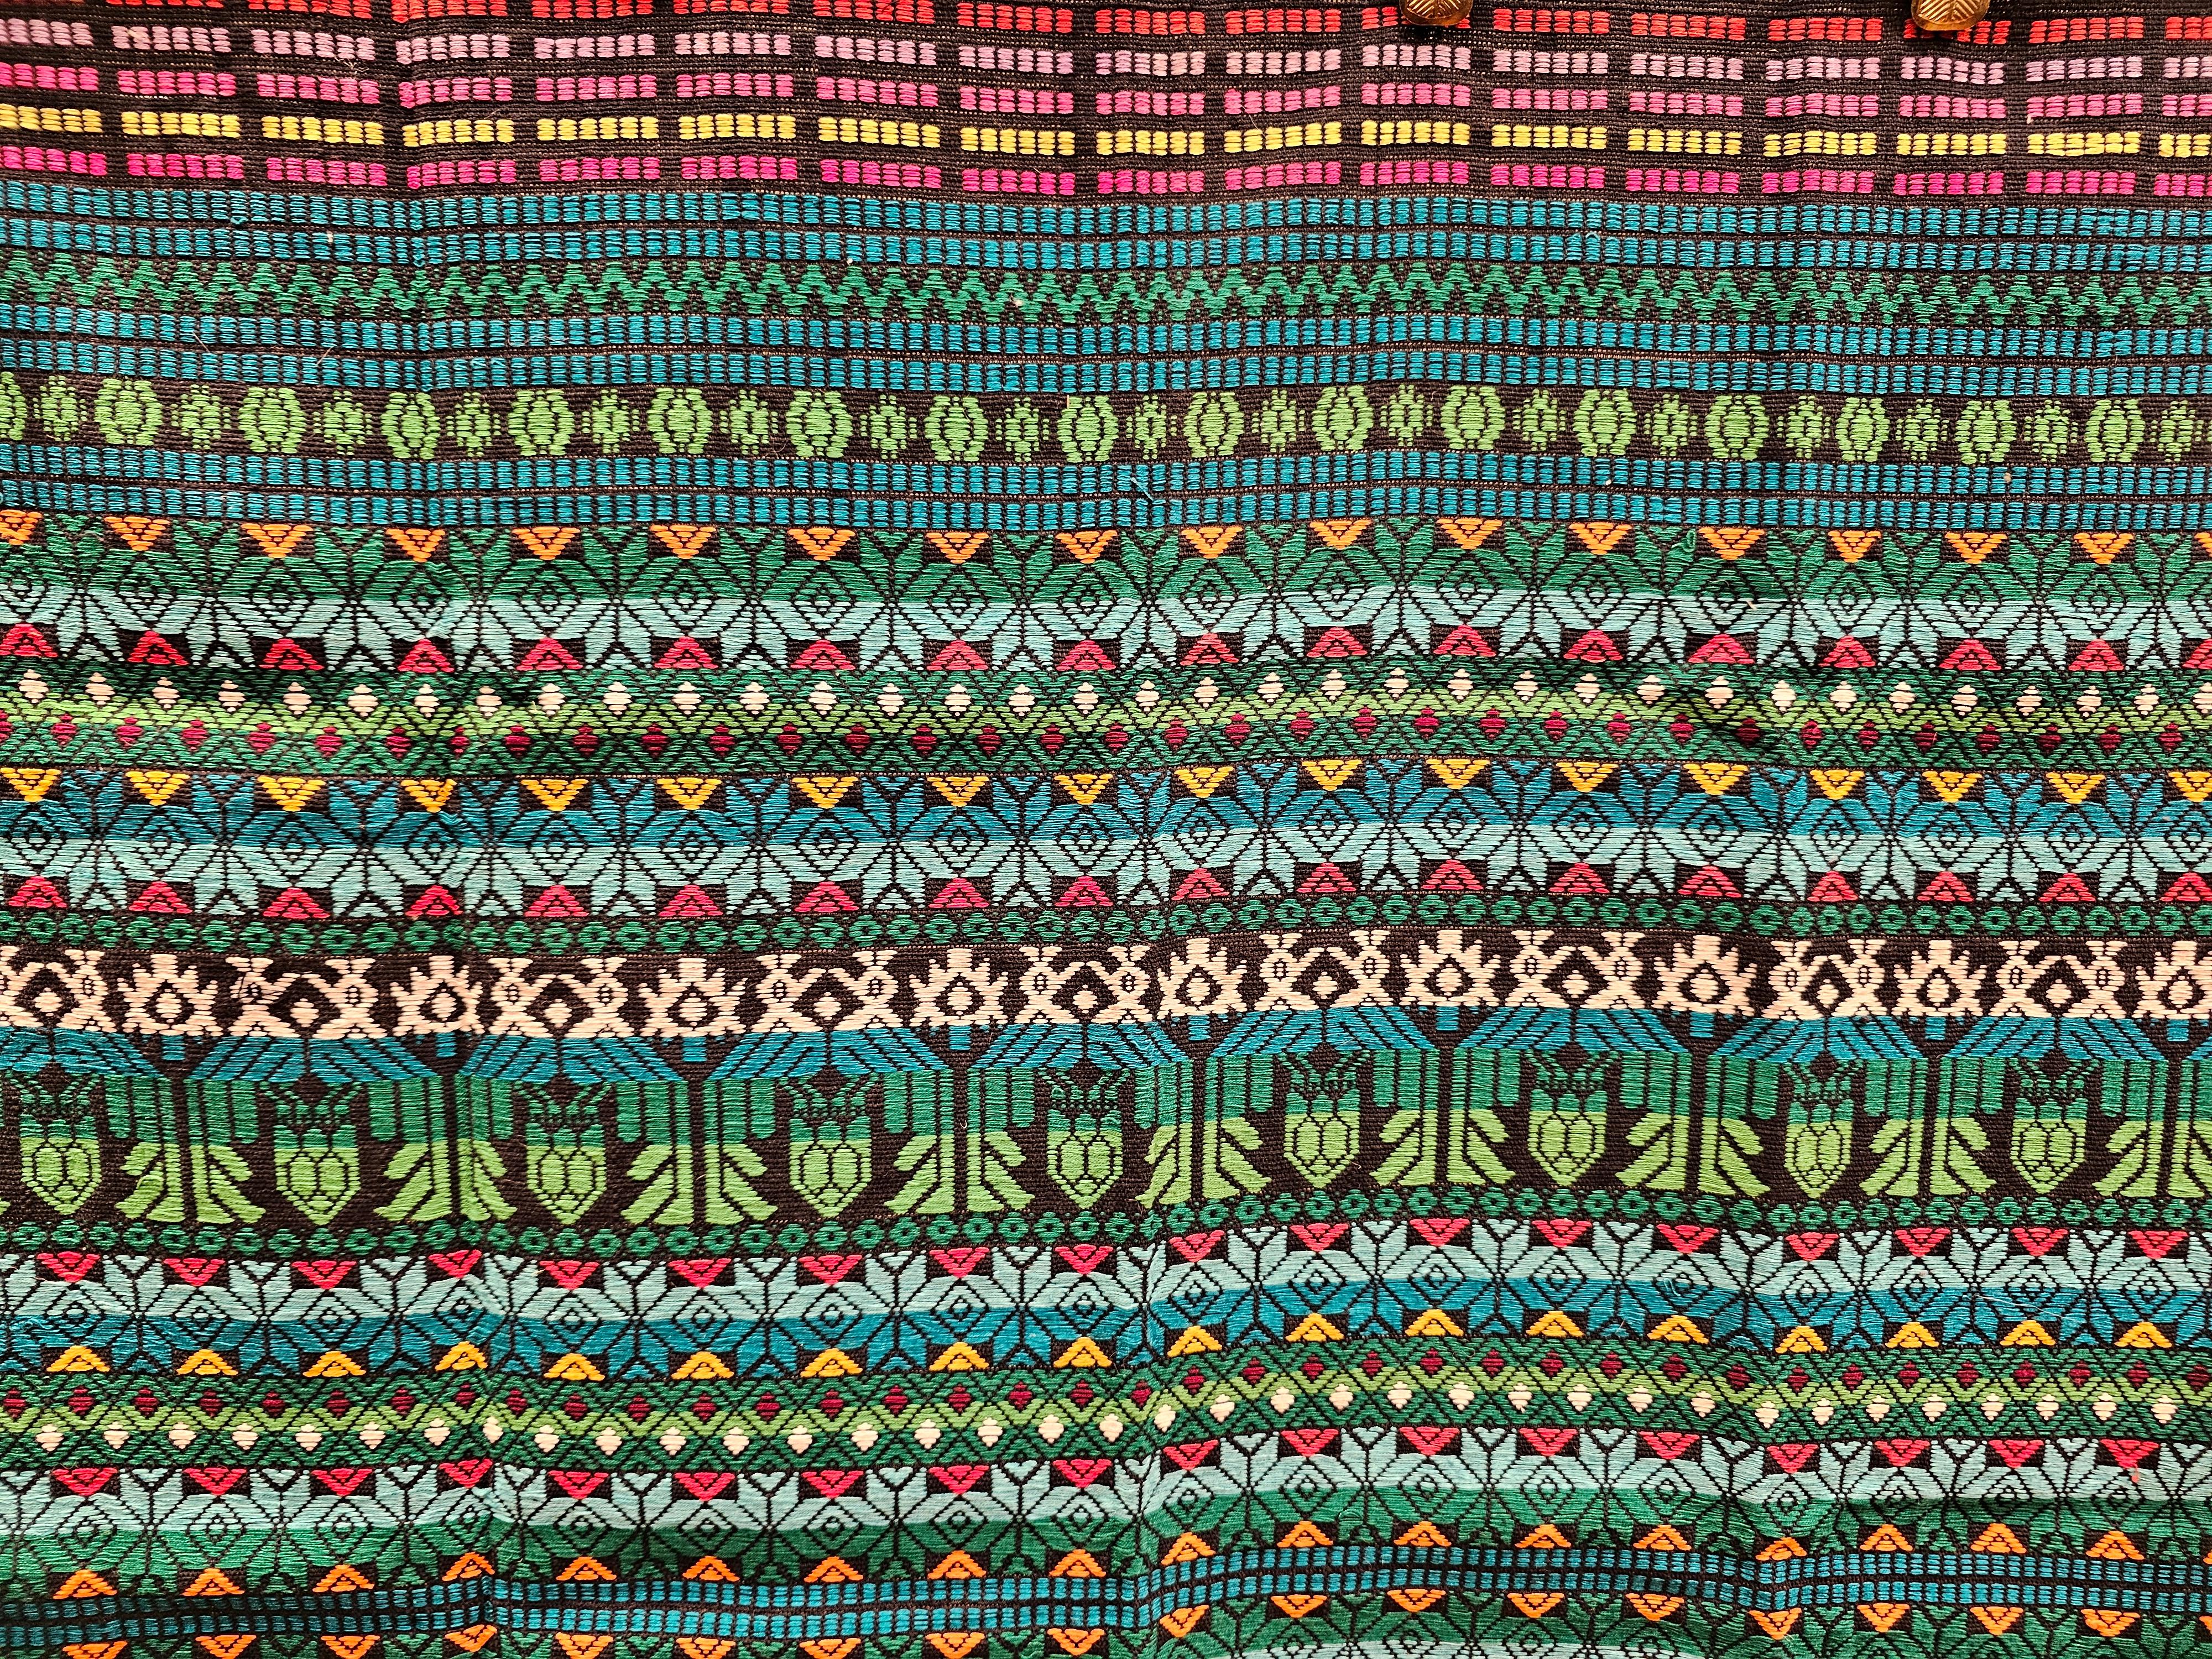 Vintage South American Hand-woven Textile Panel in Green, Blue, Red, Black In Good Condition For Sale In Barrington, IL